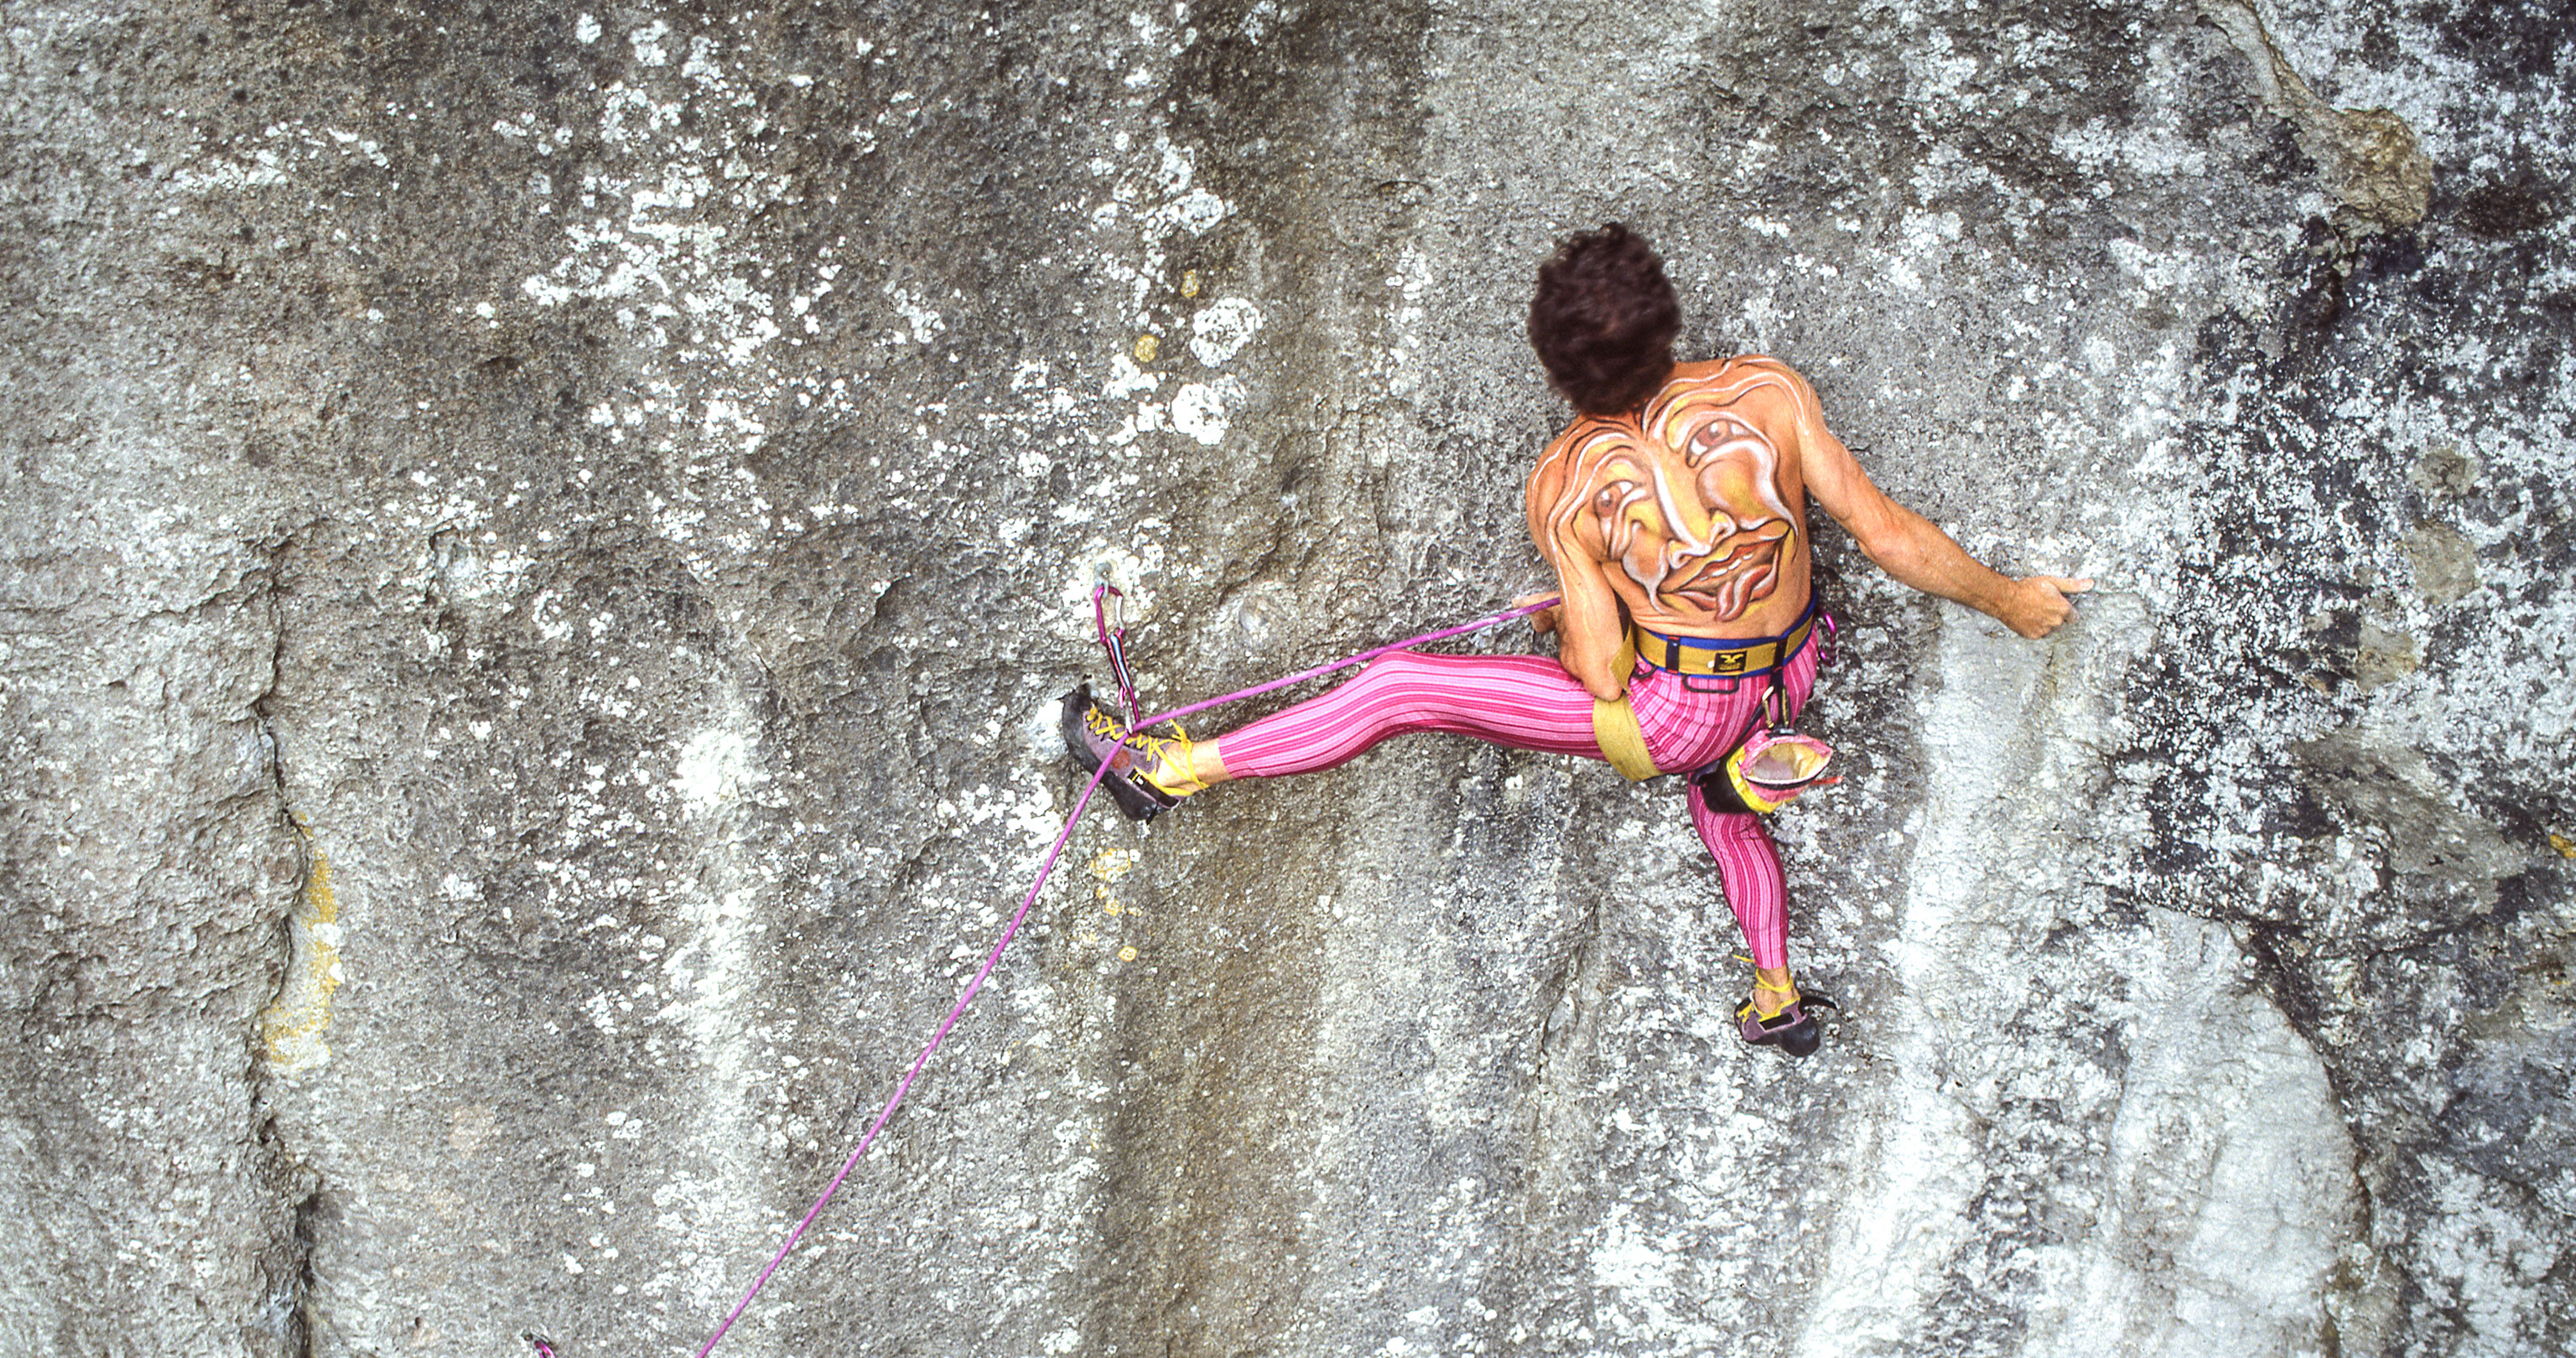 Sepp Gschwendtner redpoint rock climbing in Altmühltal with pink lycra leggings and body paint on his back